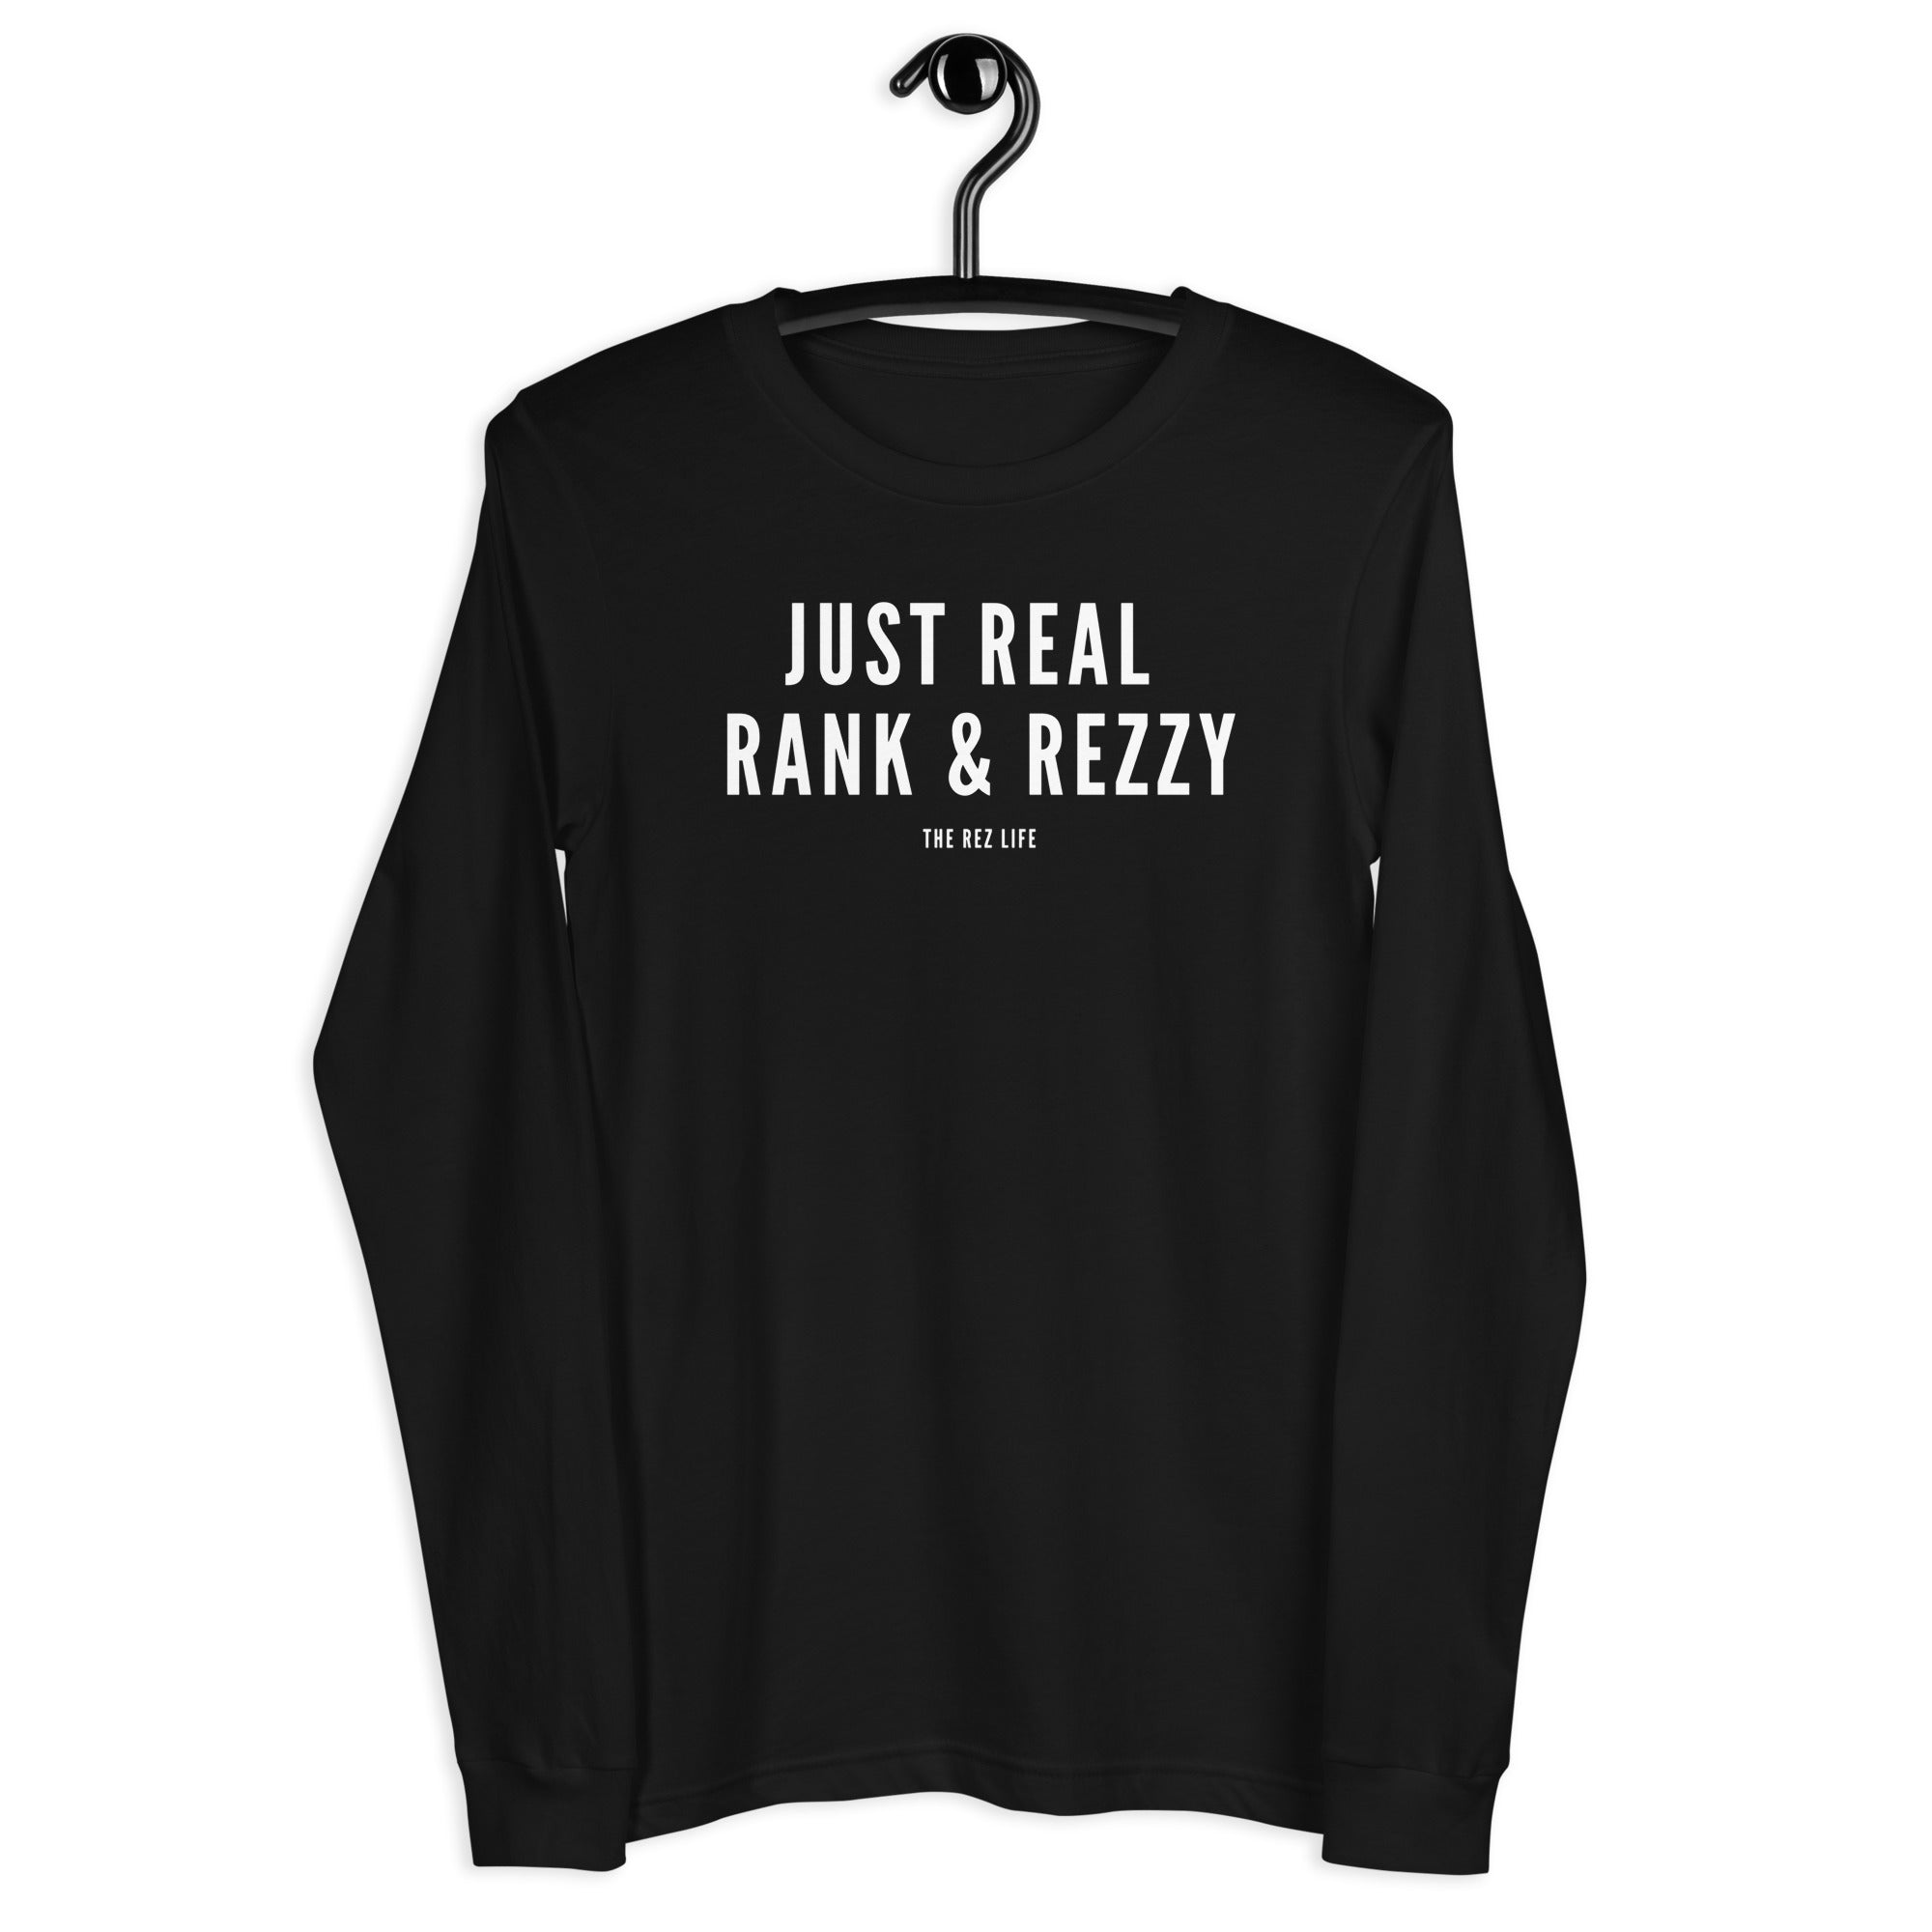 Not Even A Little, JUST REAL RANK & REZZY! Long Sleeve